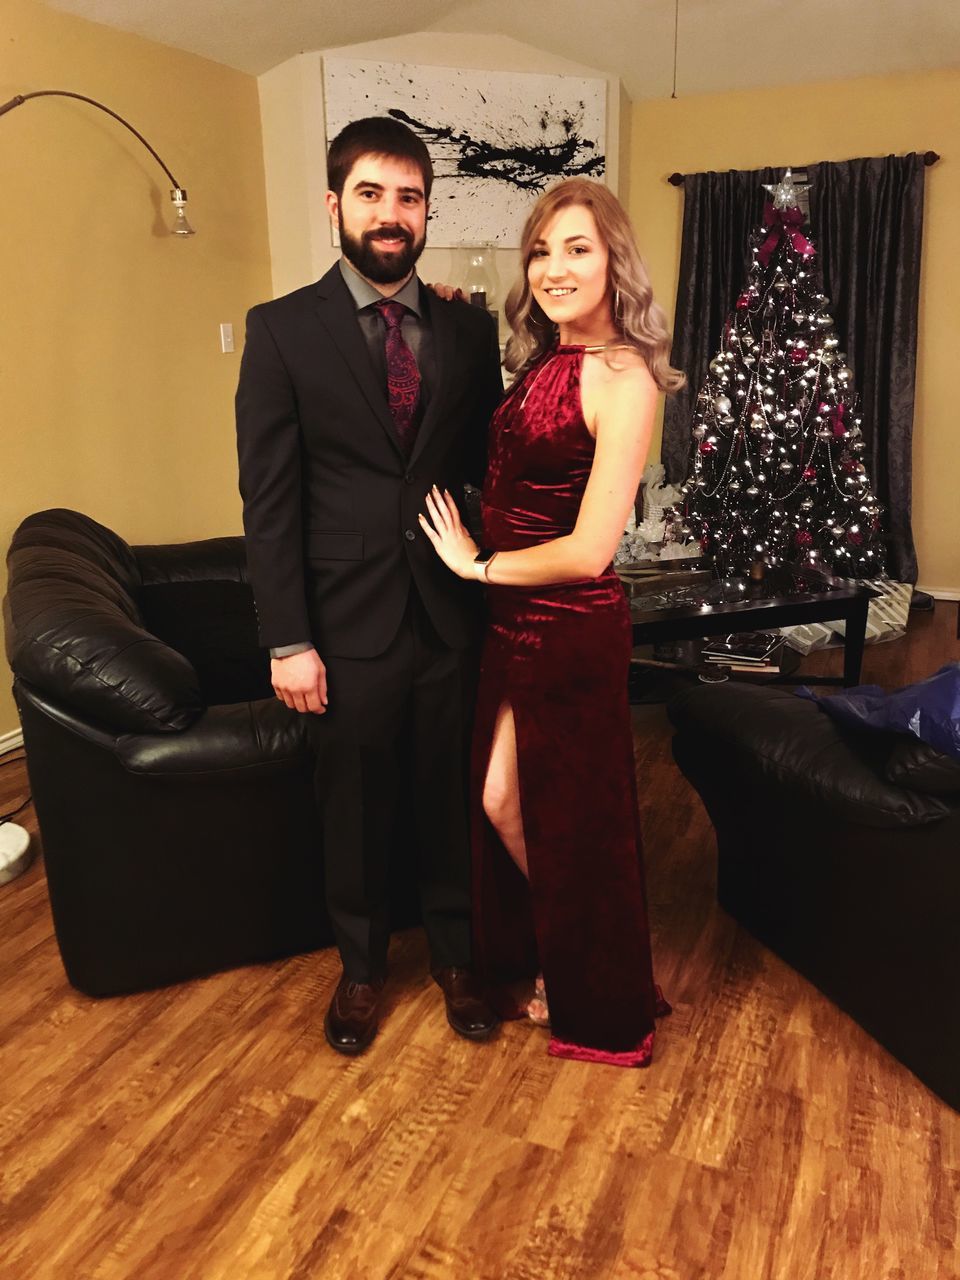 two people, young women, indoors, full length, young adult, looking at camera, suit, smiling, happiness, young men, togetherness, formalwear, love, real people, celebration, lifestyles, beautiful woman, standing, well-dressed, portrait, men, evening gown, day, people